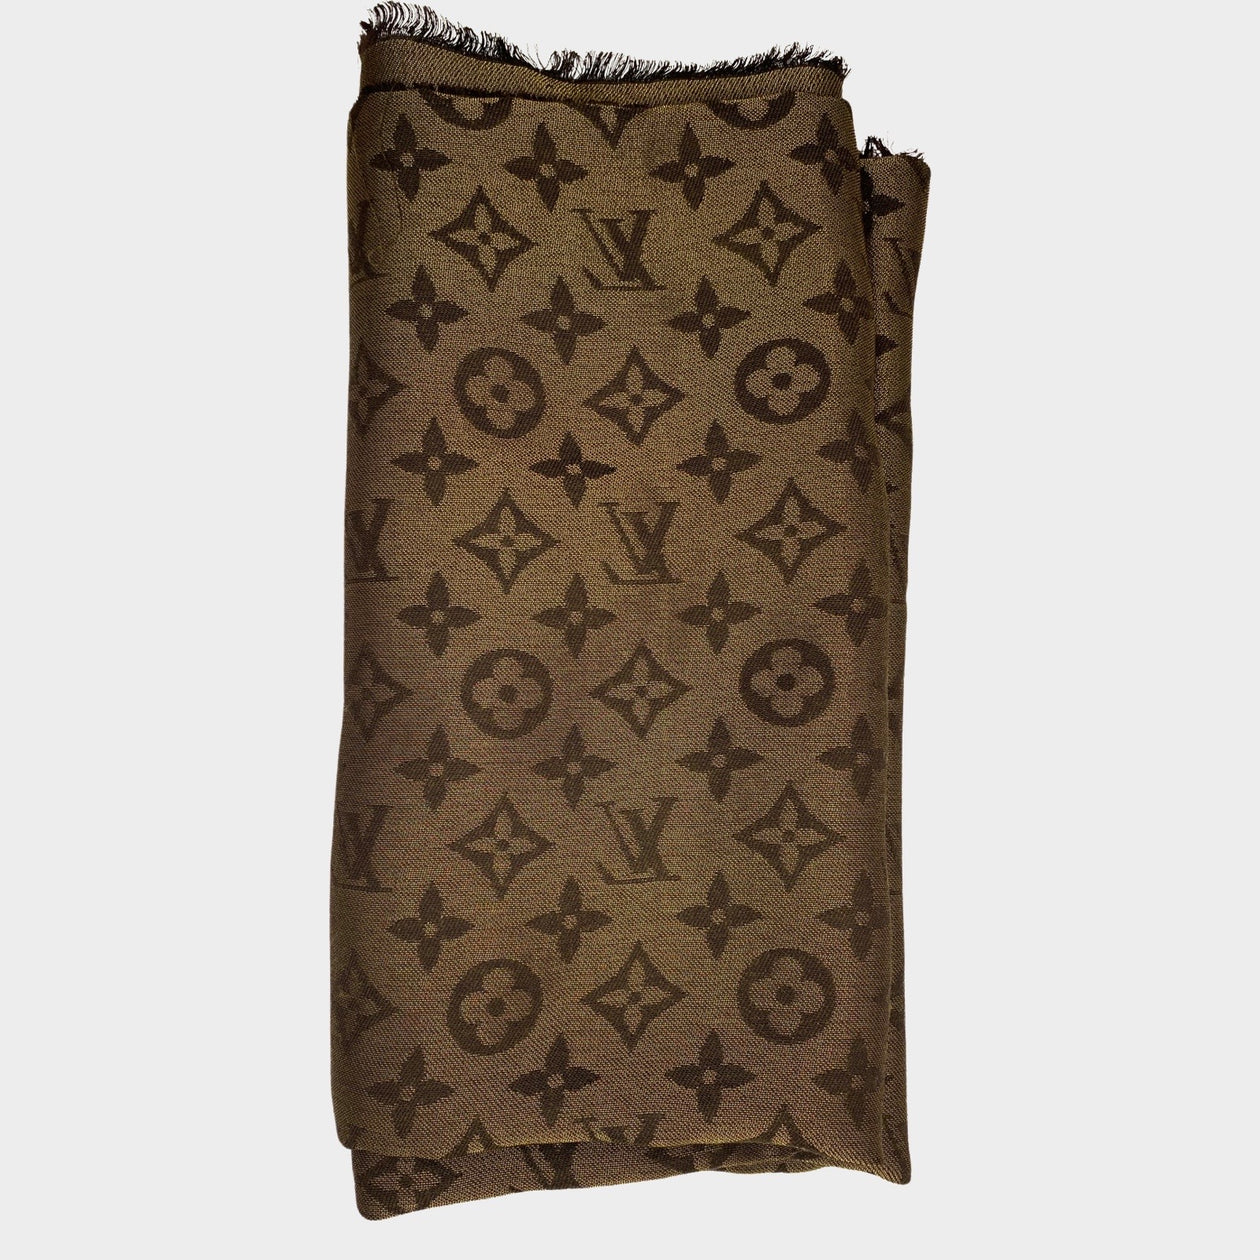 LV Logo Large Brown And Gold Scarf Brand New